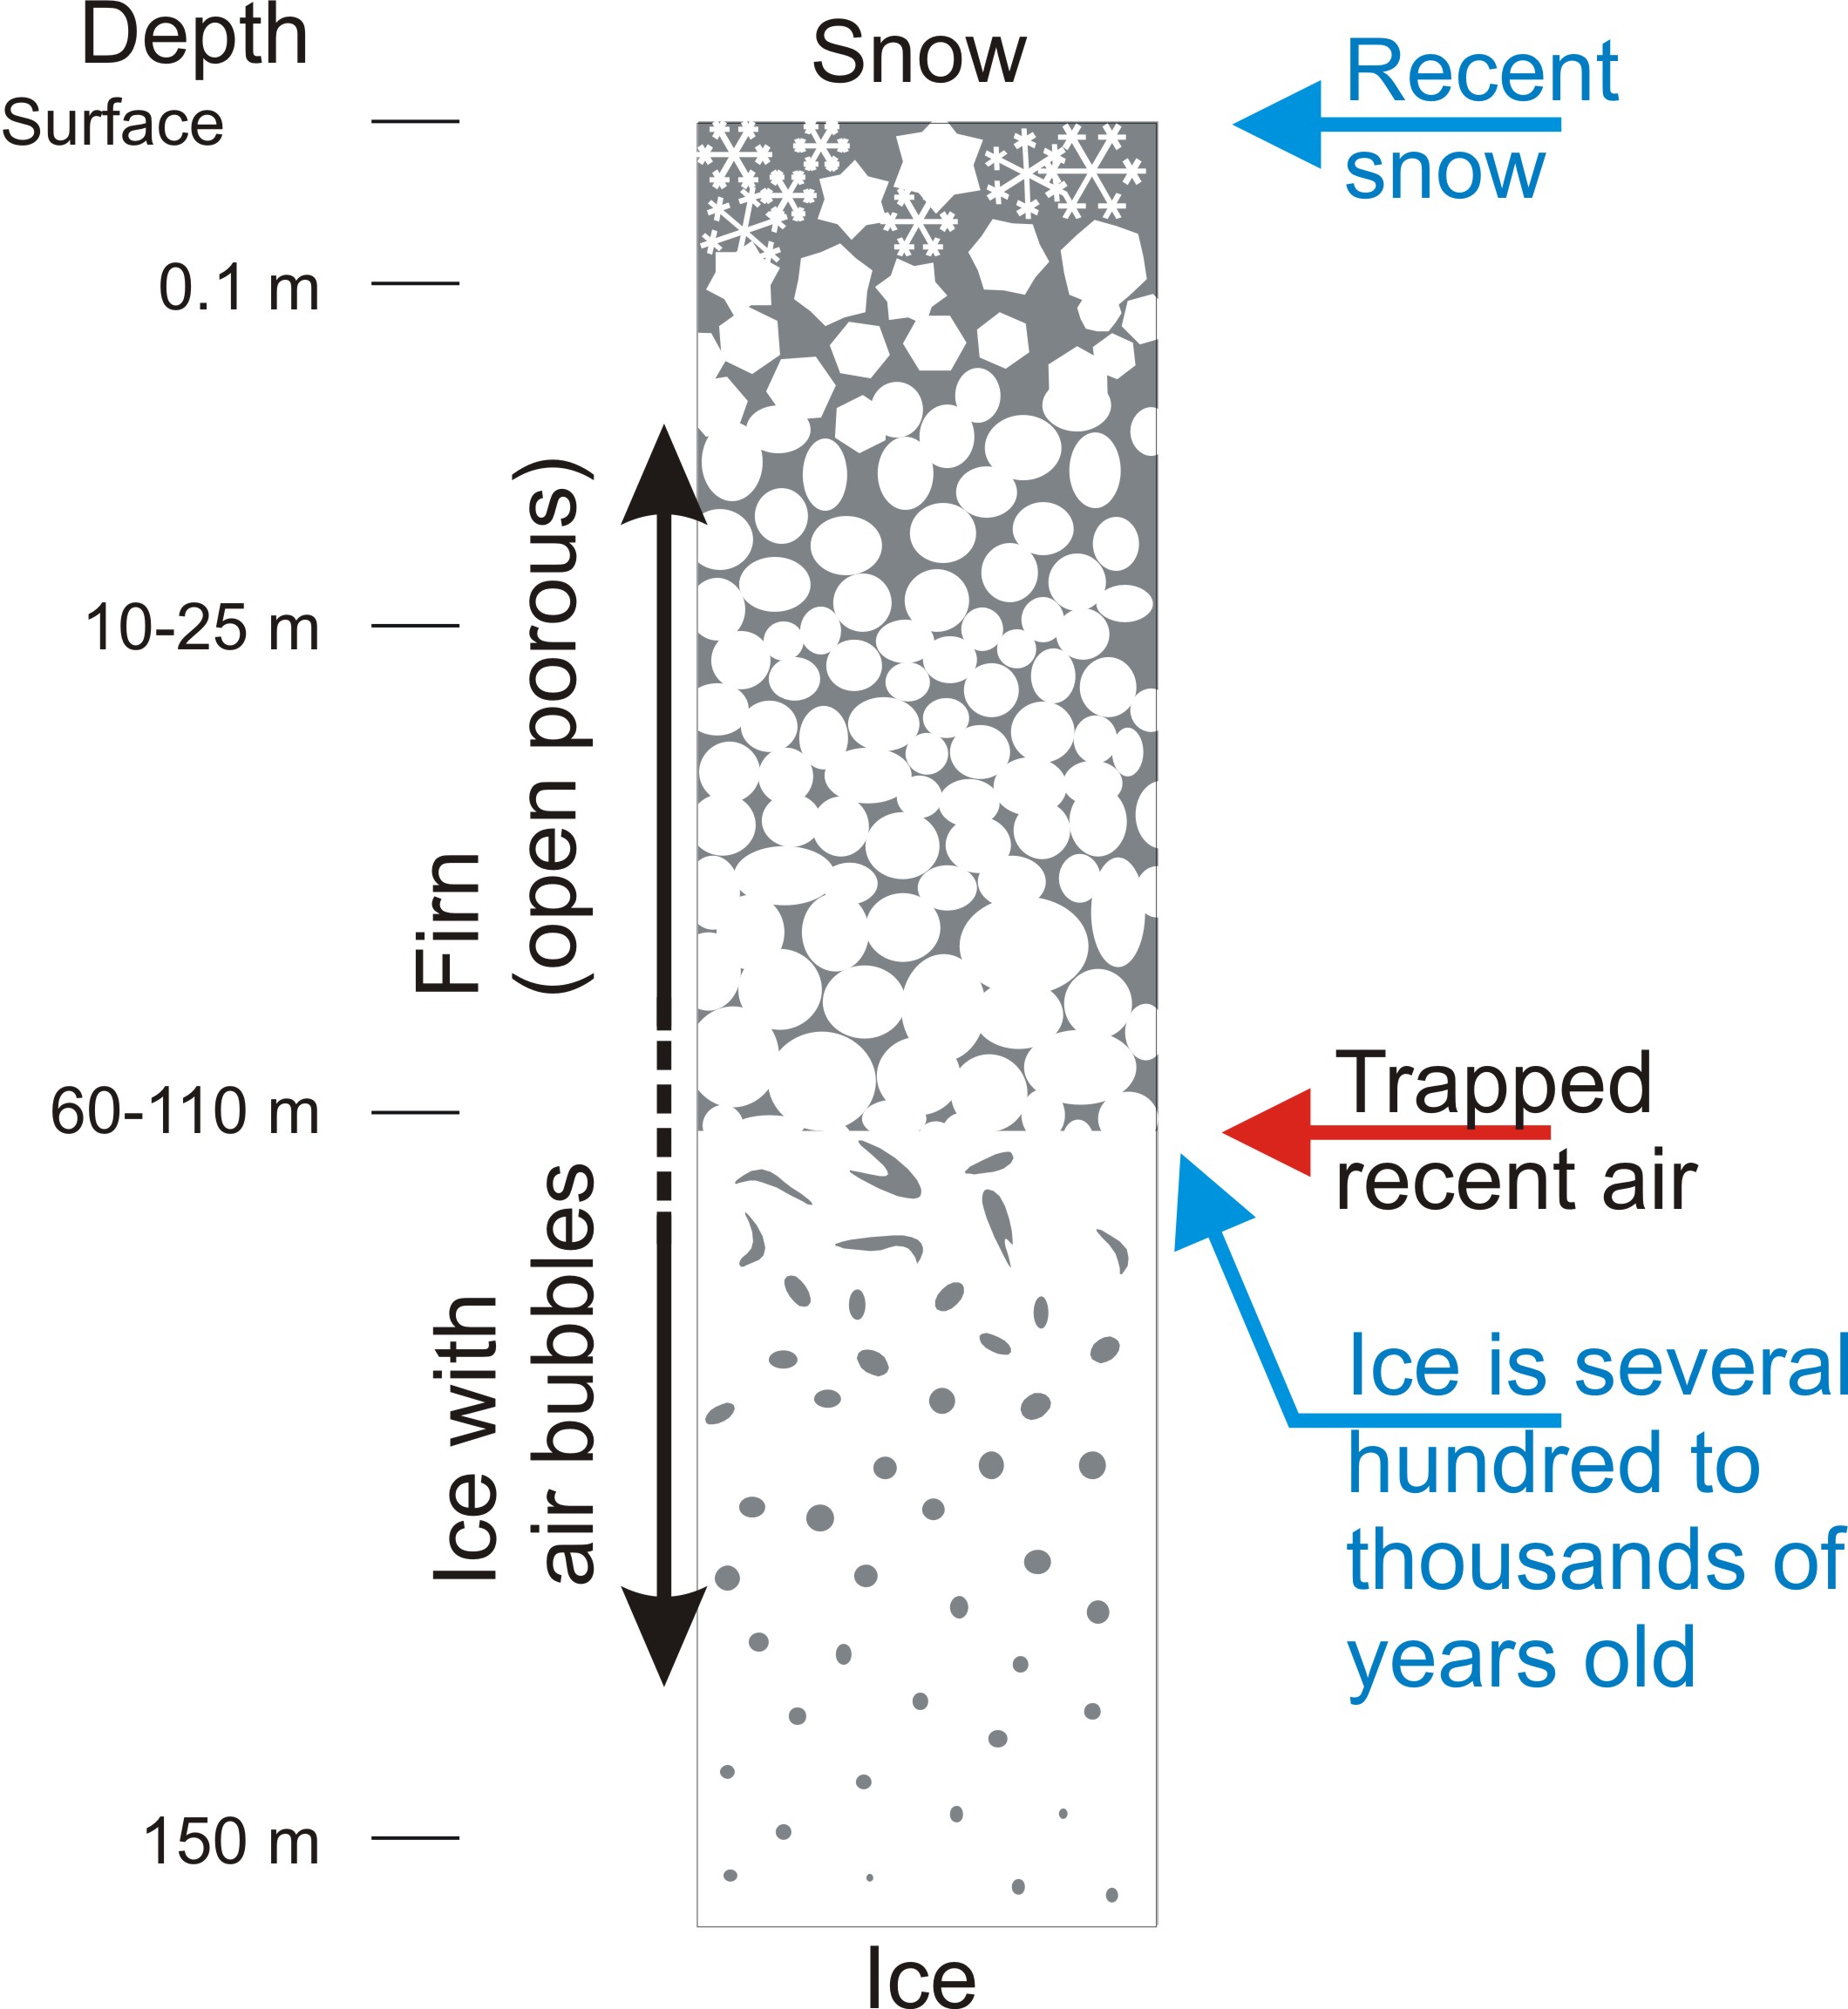 schematic of snow to ice transition with depth indicating closing of air bubbles between 60-110 m depth